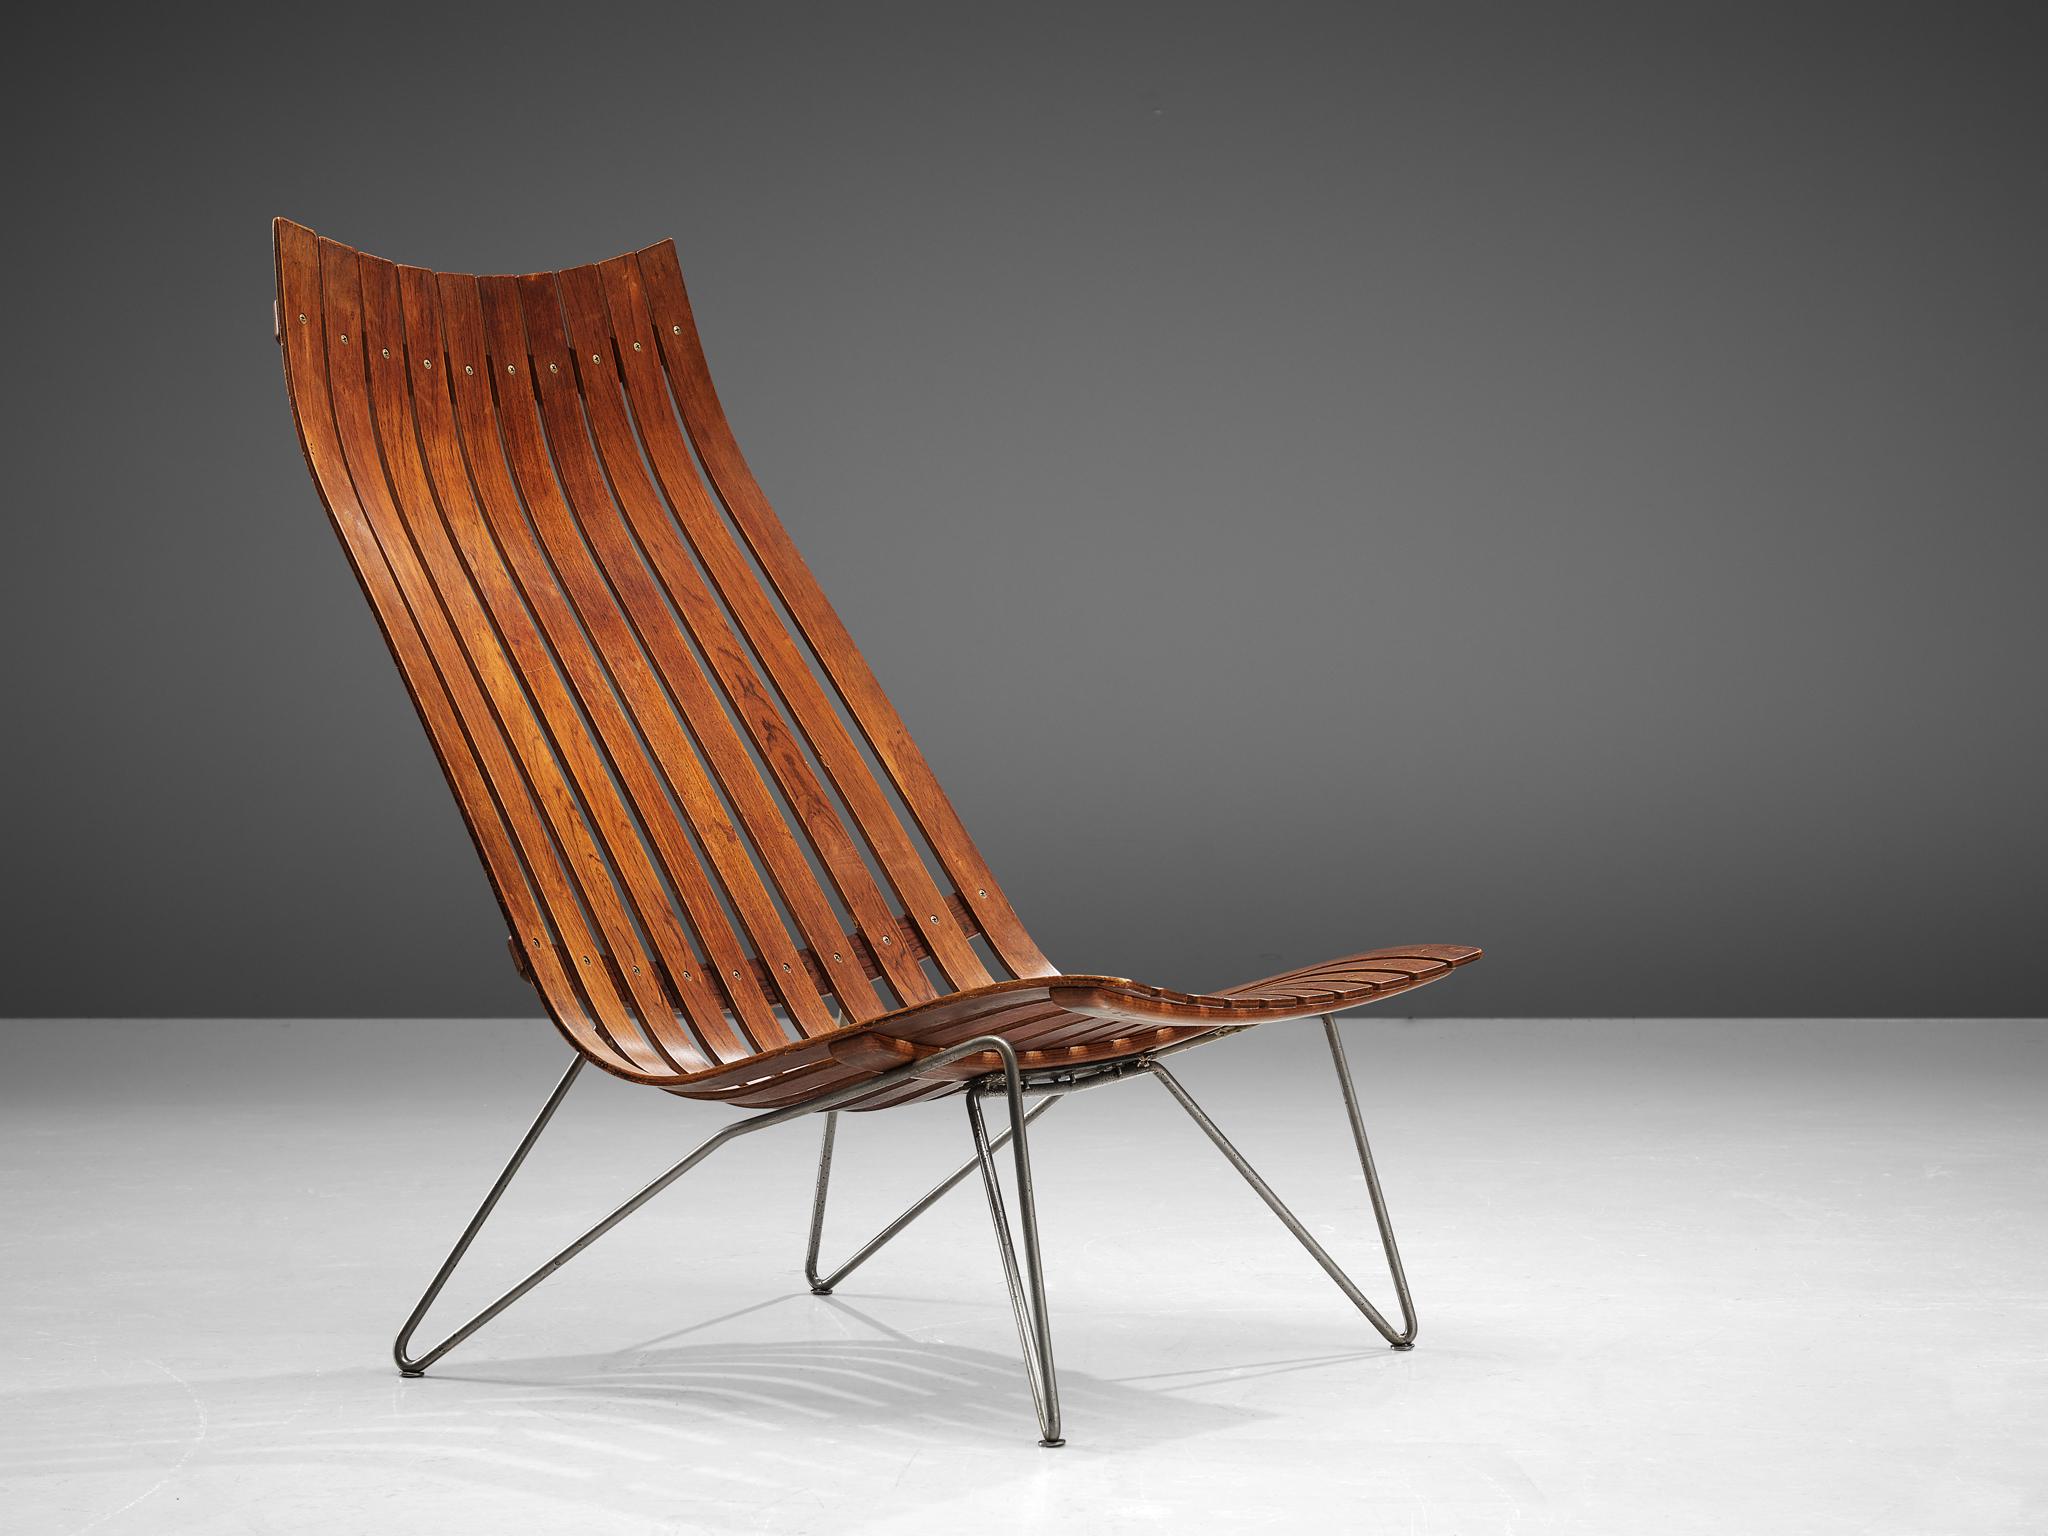 Hans Brattrud for Hove Mobler, lounge chair model 'Scandia' in rosewood and metal, Norway, circa 1957. 

This chair was part of the Scandia series, designed by Norwegian designer Hans Brattrud and produced by Hove Mobler. The chair is executed in